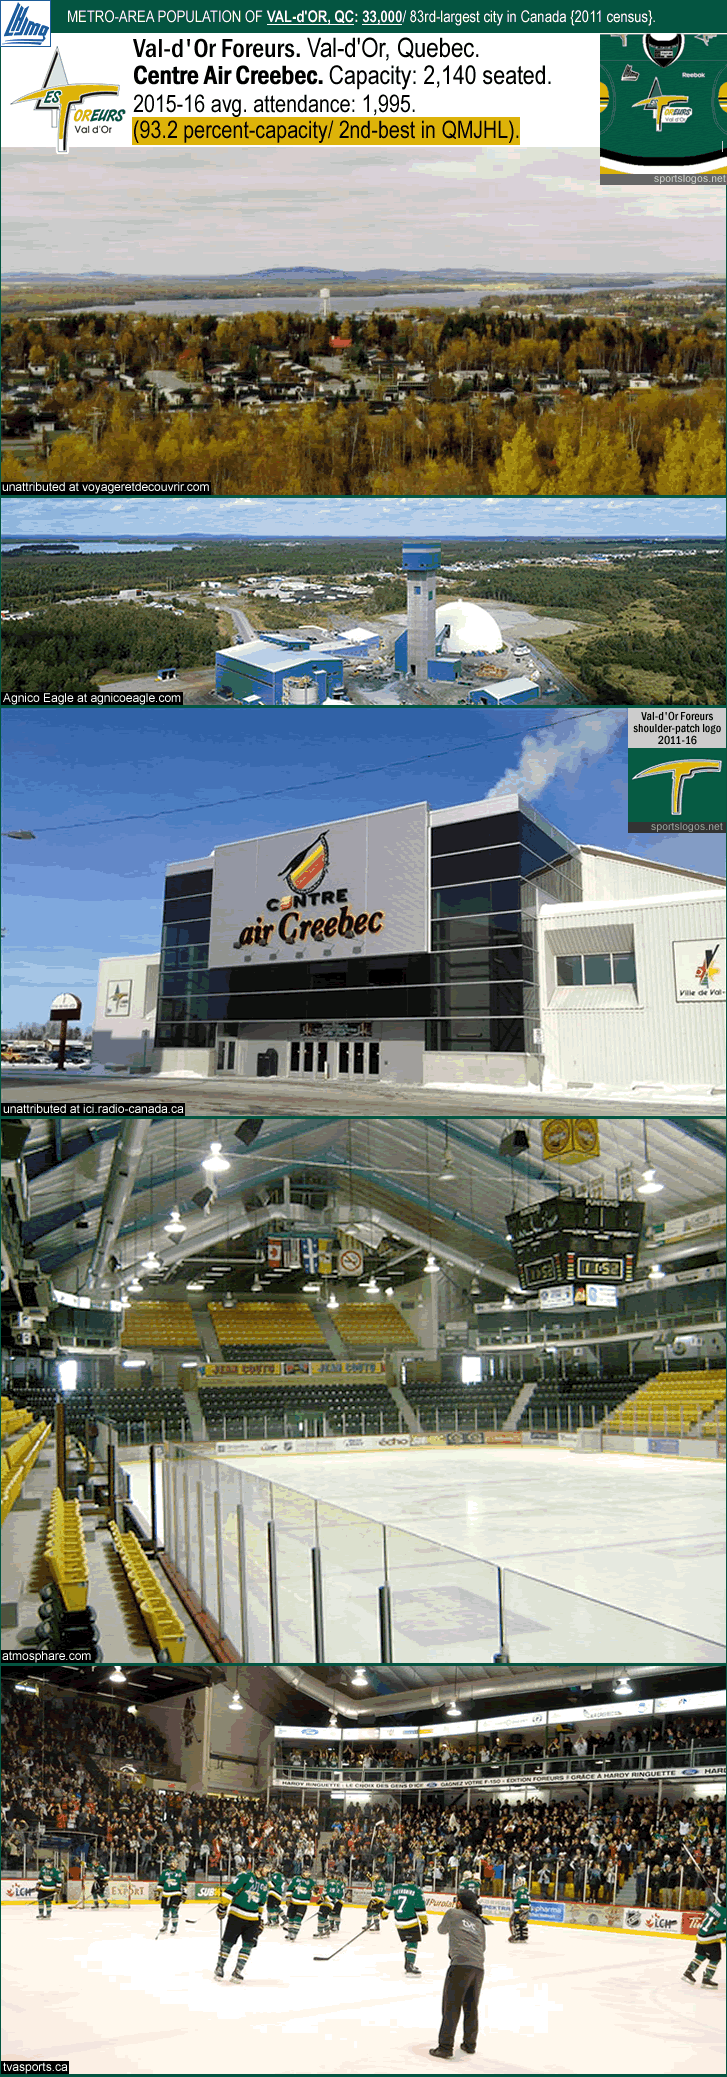 val-d-or-foreurs_centre-air-creebec_c_.gif